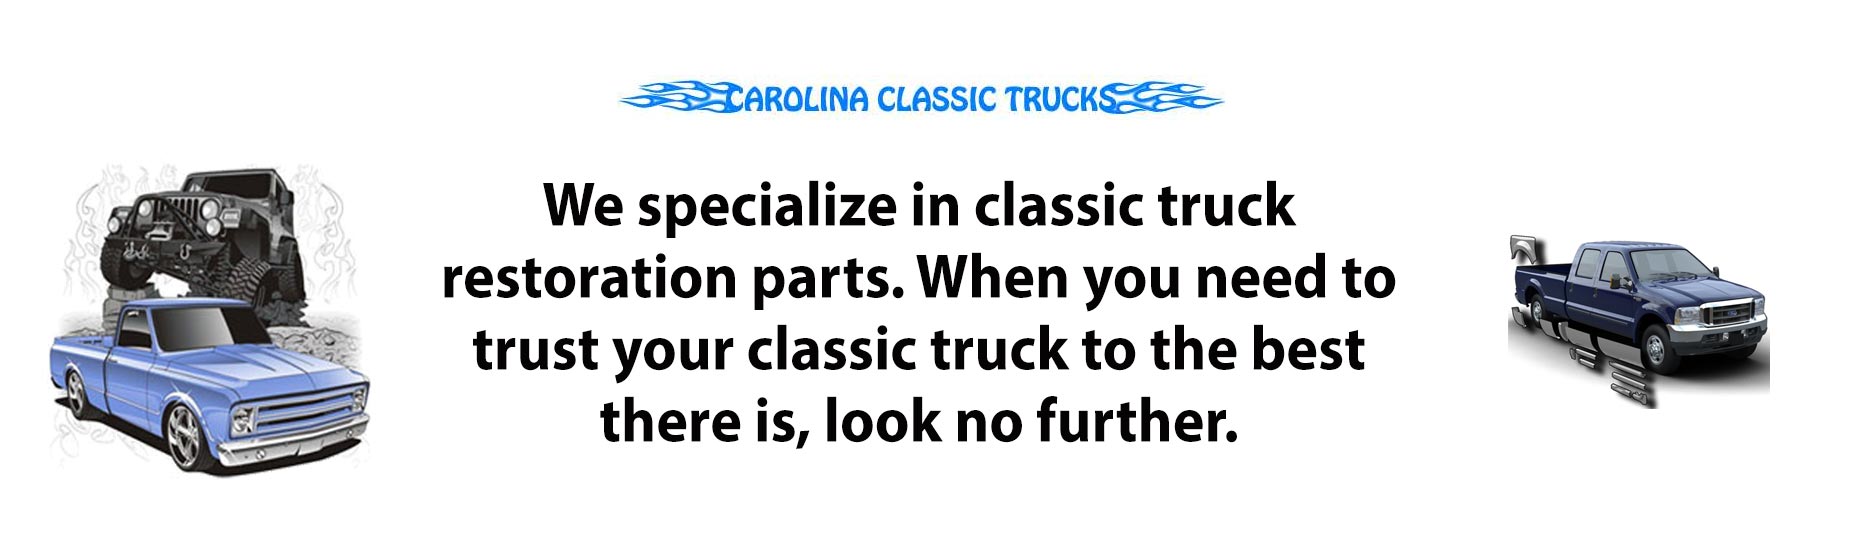 Classic Truck Restoration Parts and Accessories